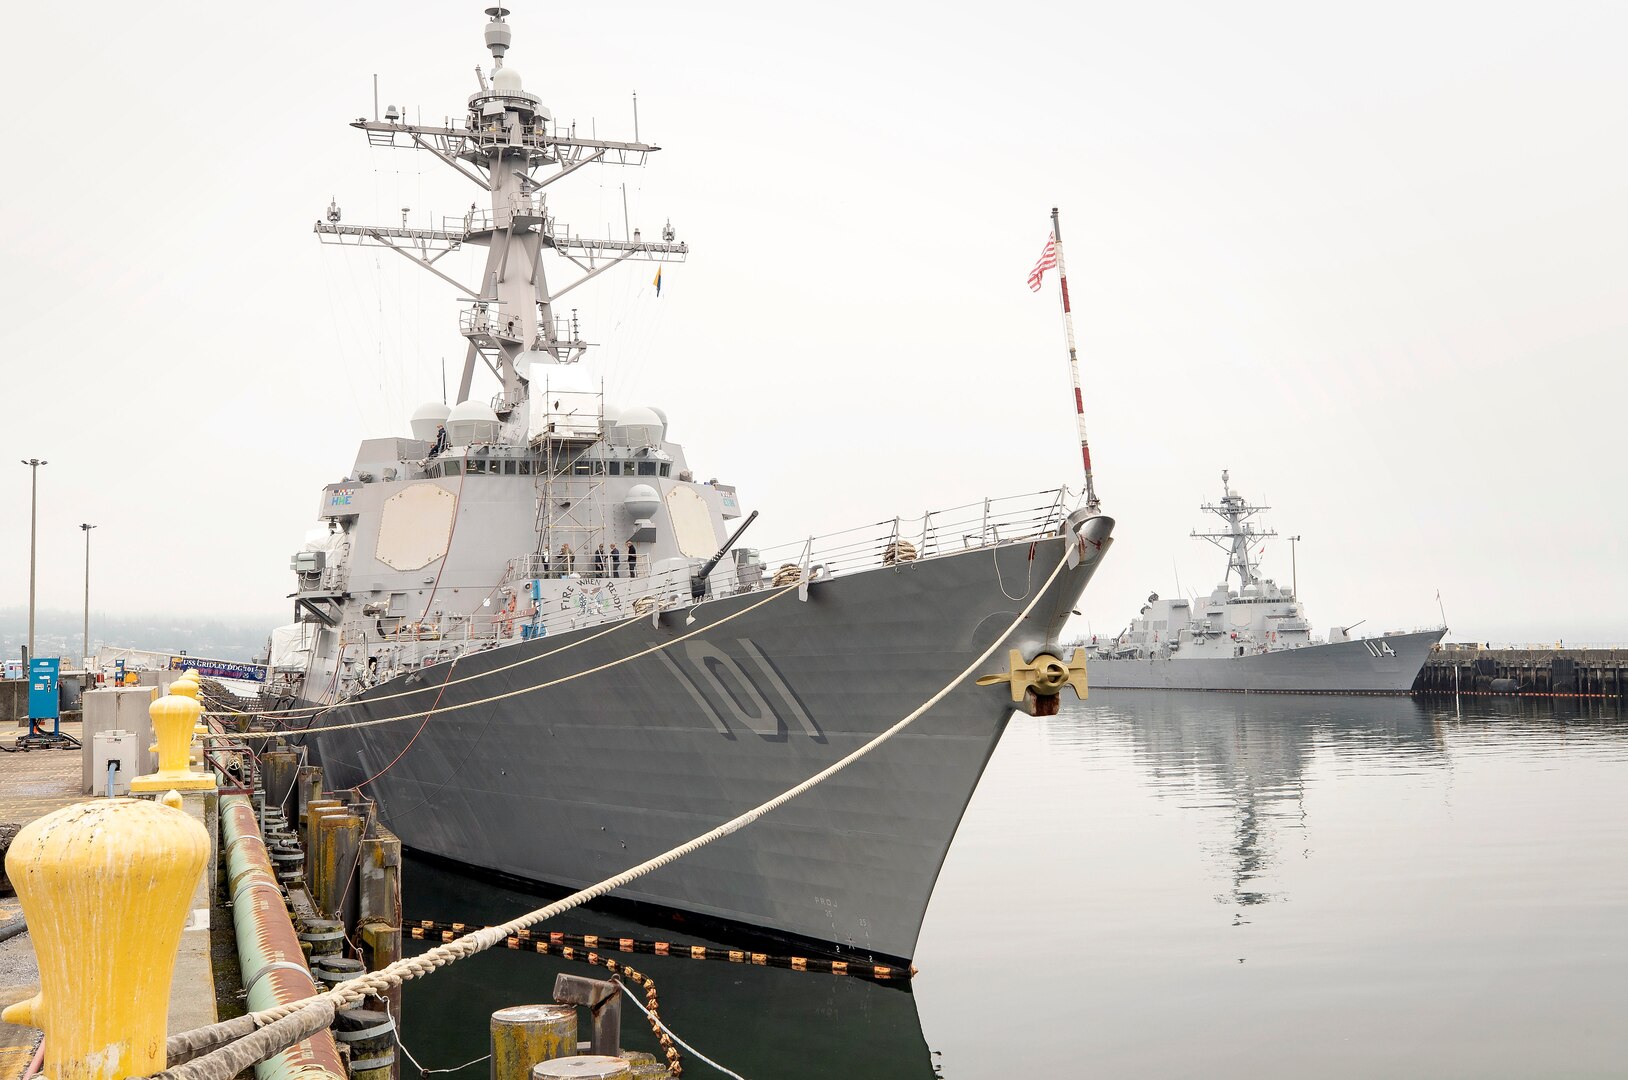 The Arleigh Burke class destroyer USS Gridley (DDG 101) completed an on time, pier side pre-deployment availability, June 14 at Naval Station Everett in Everett, Wash.